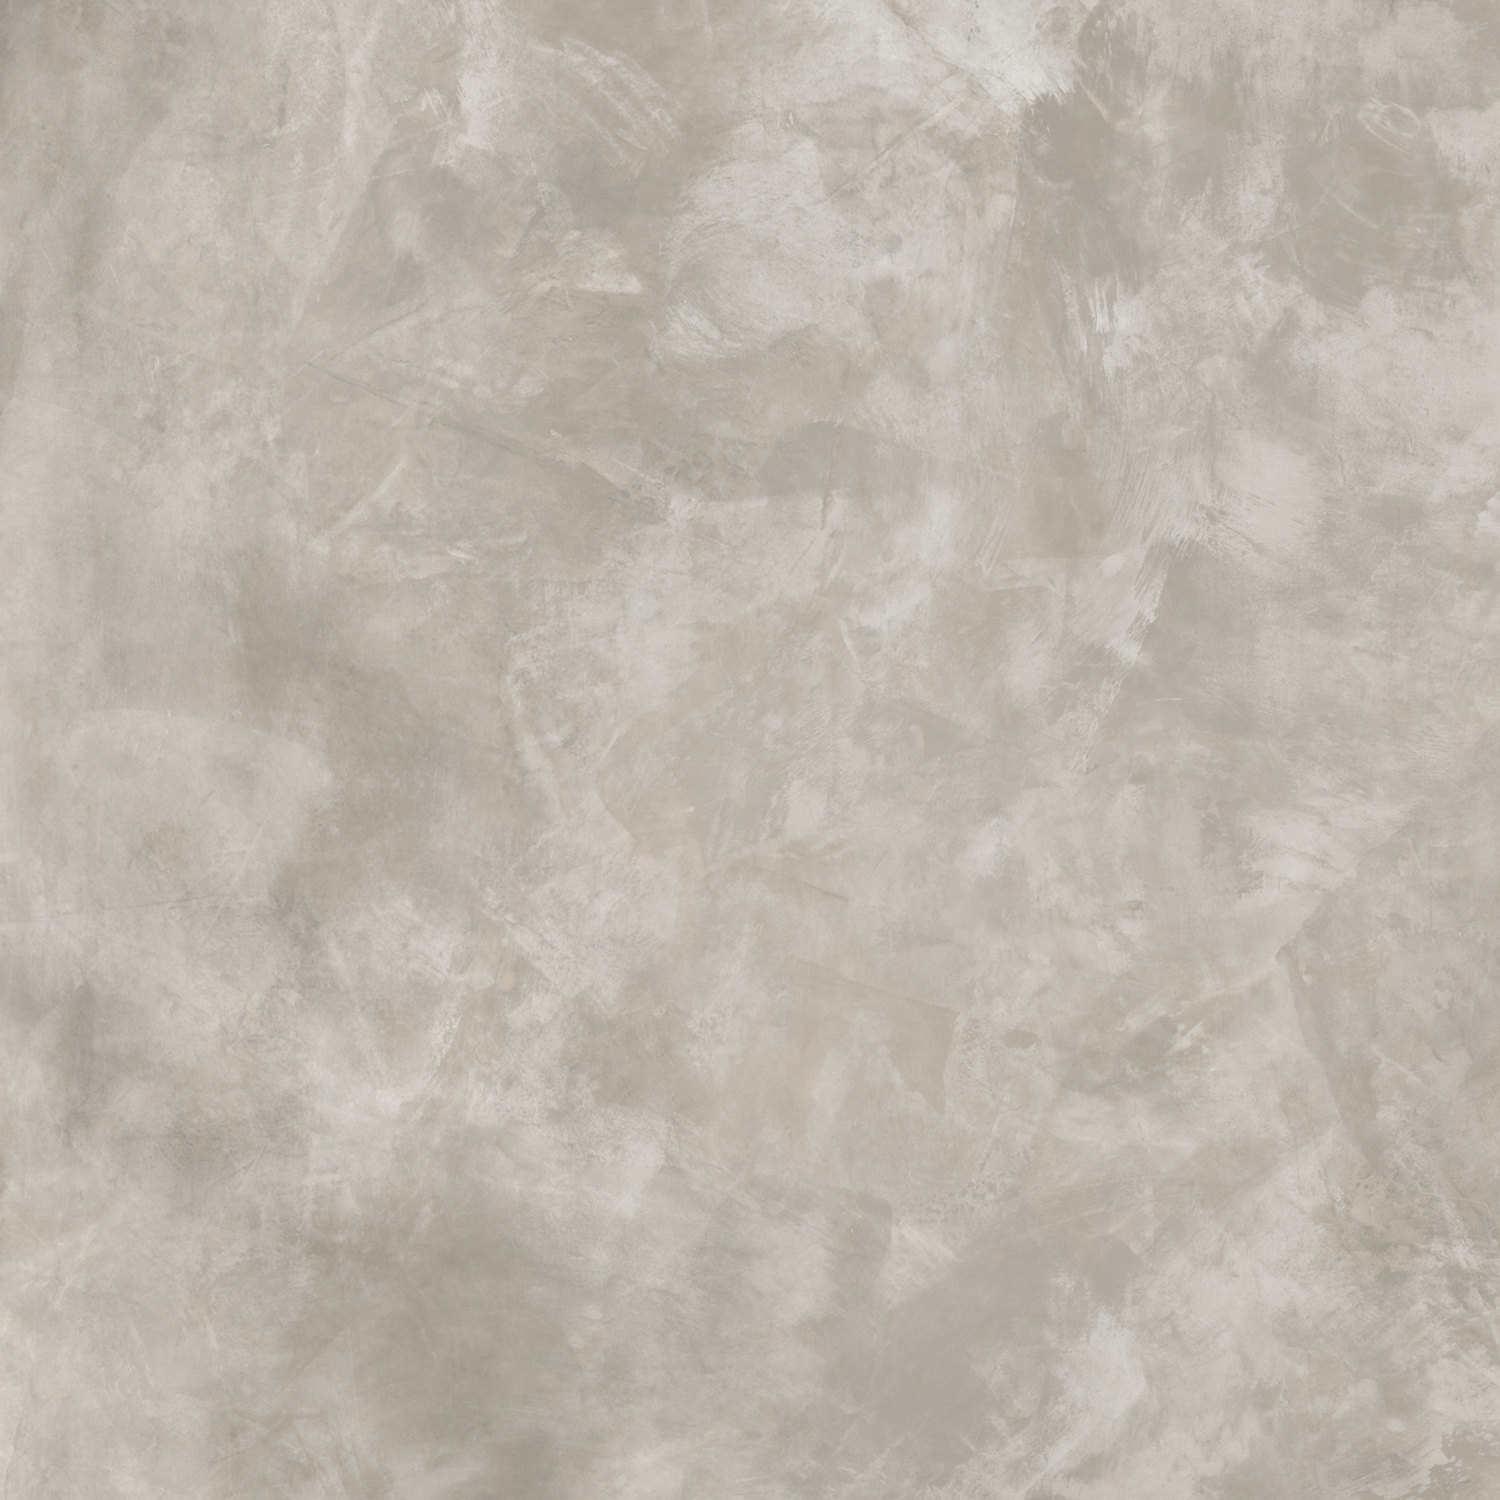 Caesar Join Manor Soft AFJB 80x80cm rectified 9mm